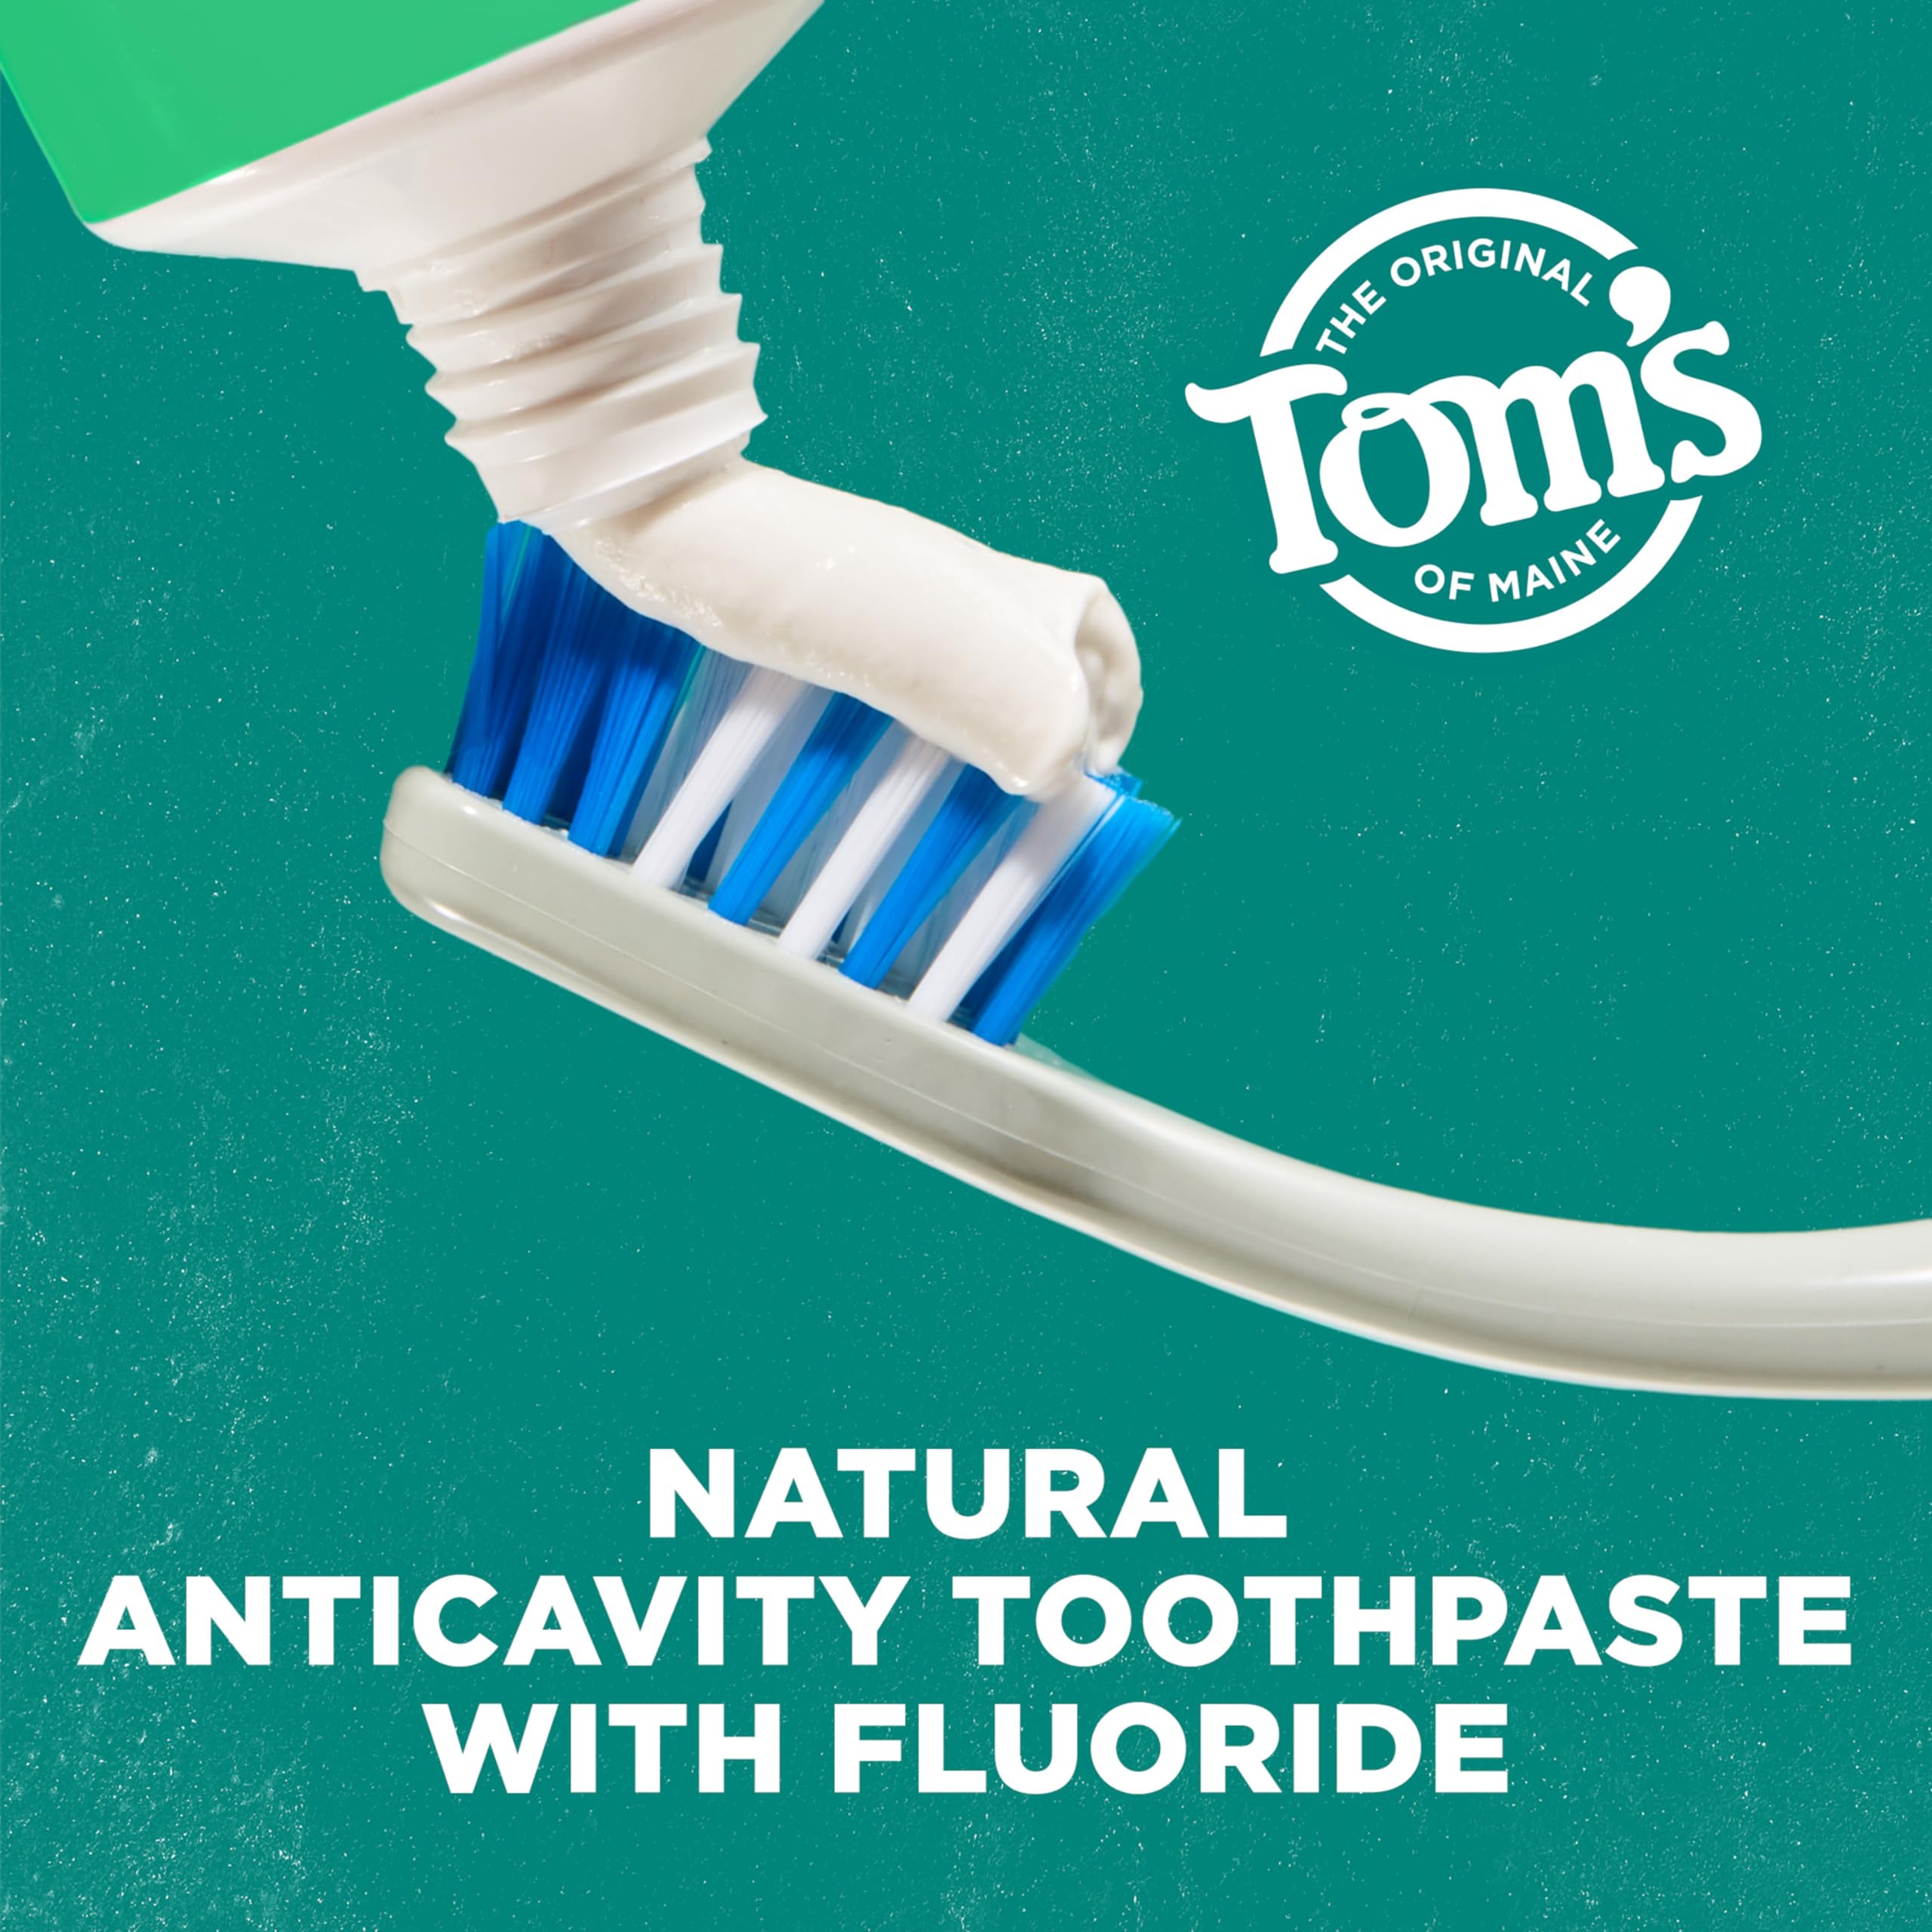 Tom's of Maine Wicked Fresh! Natural Fluoride Anticavity Toothpaste, 3 Pack, 4.0oz